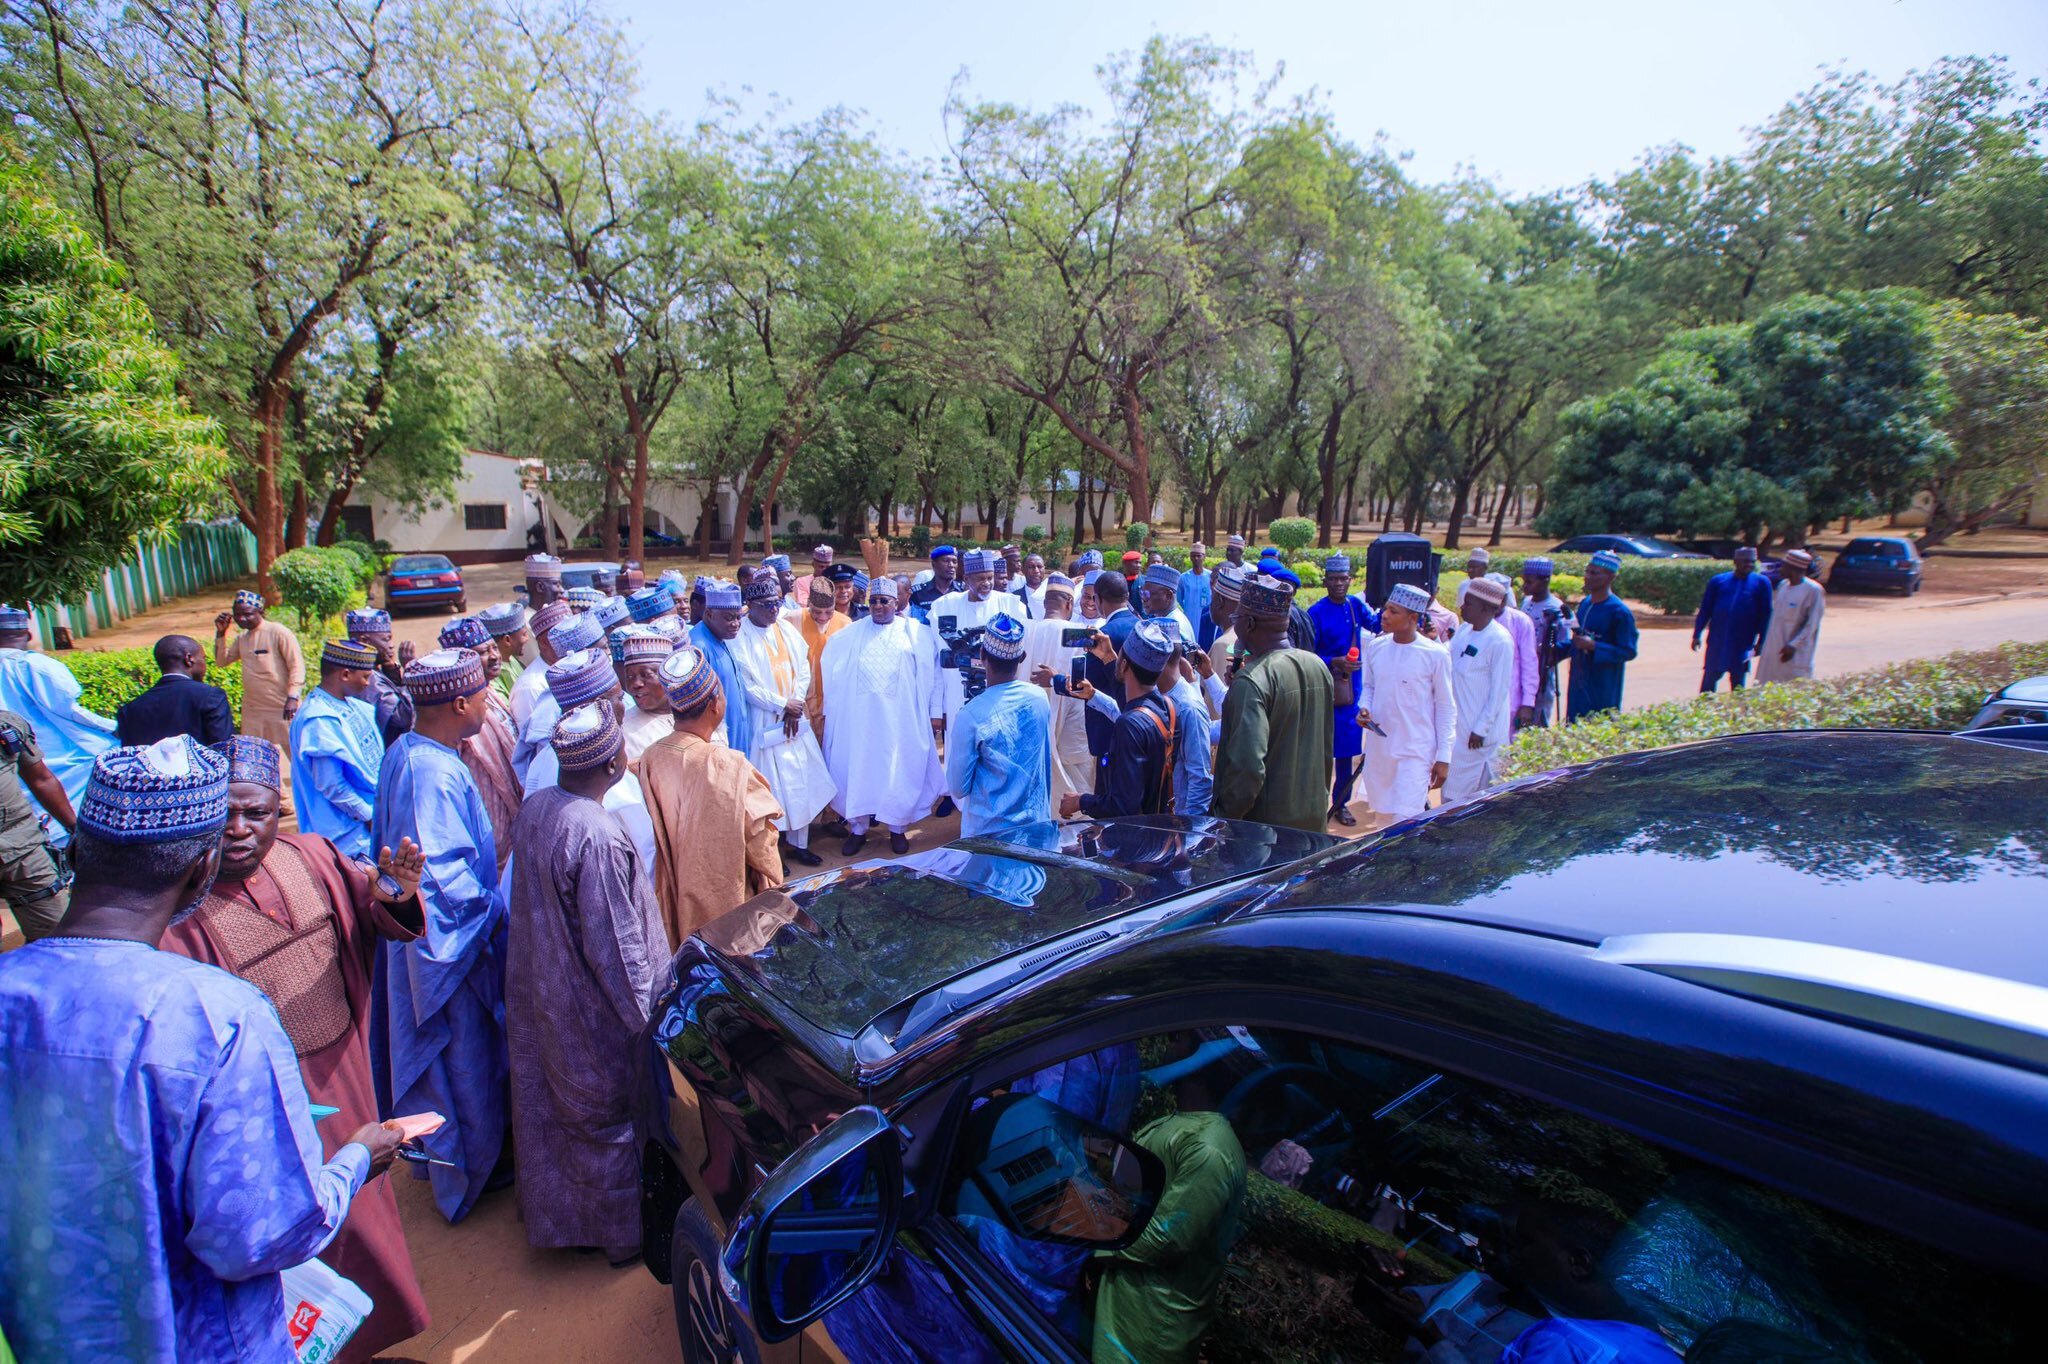 Governor Idris Presents 24 Brand New Toyota Fortuner SUVs to Kebbi State Lawmakers